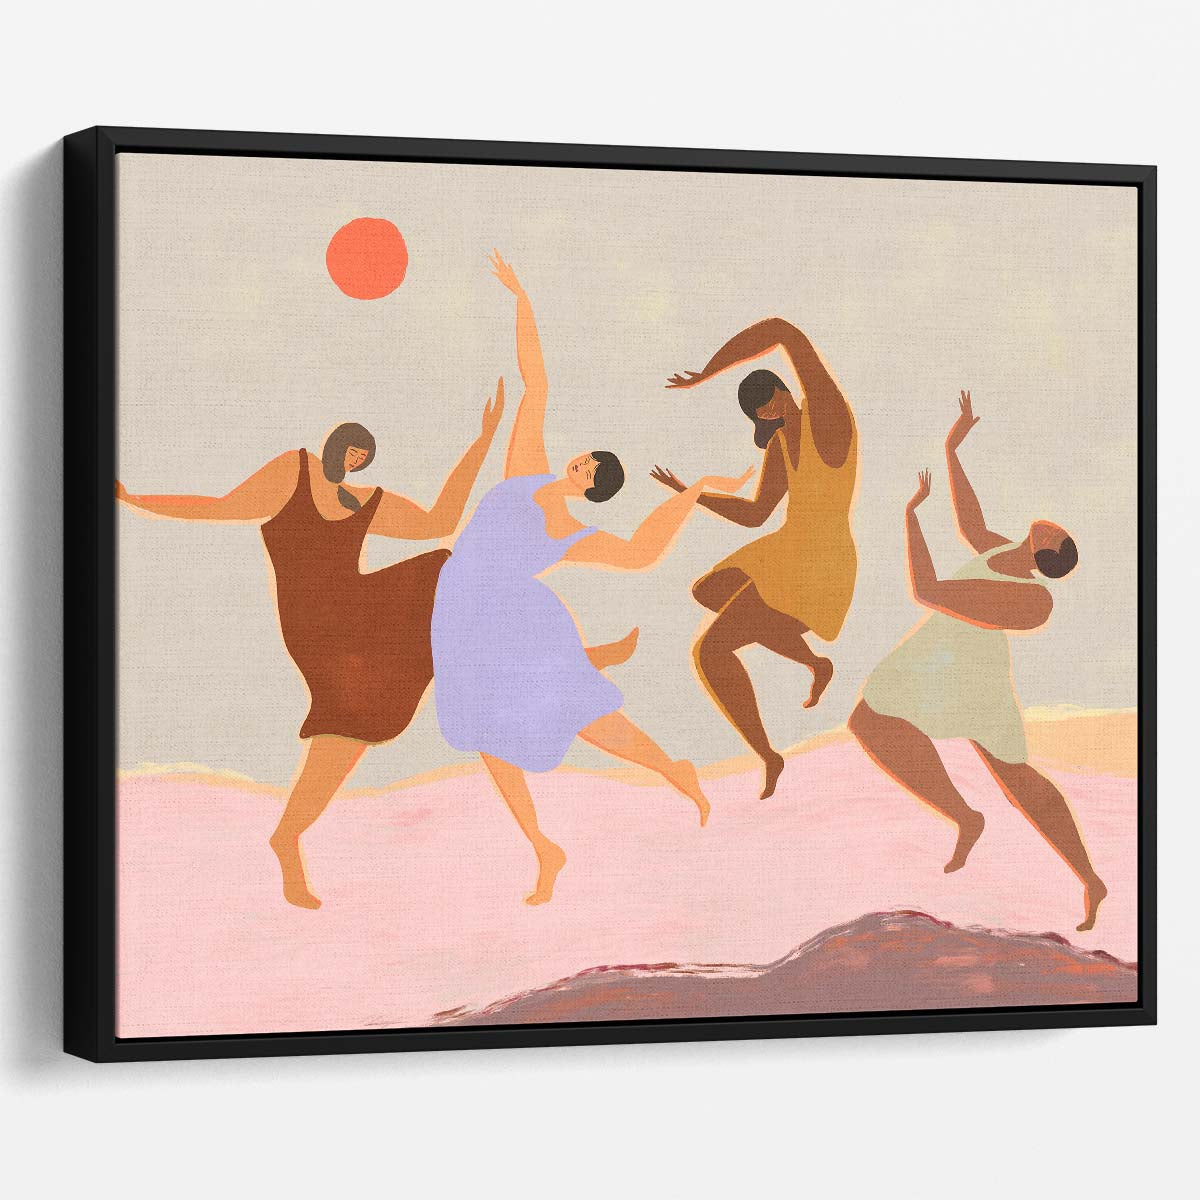 Colorful Dance of Togetherness Women Portrait Wall Art by Luxuriance Designs. Made in USA.